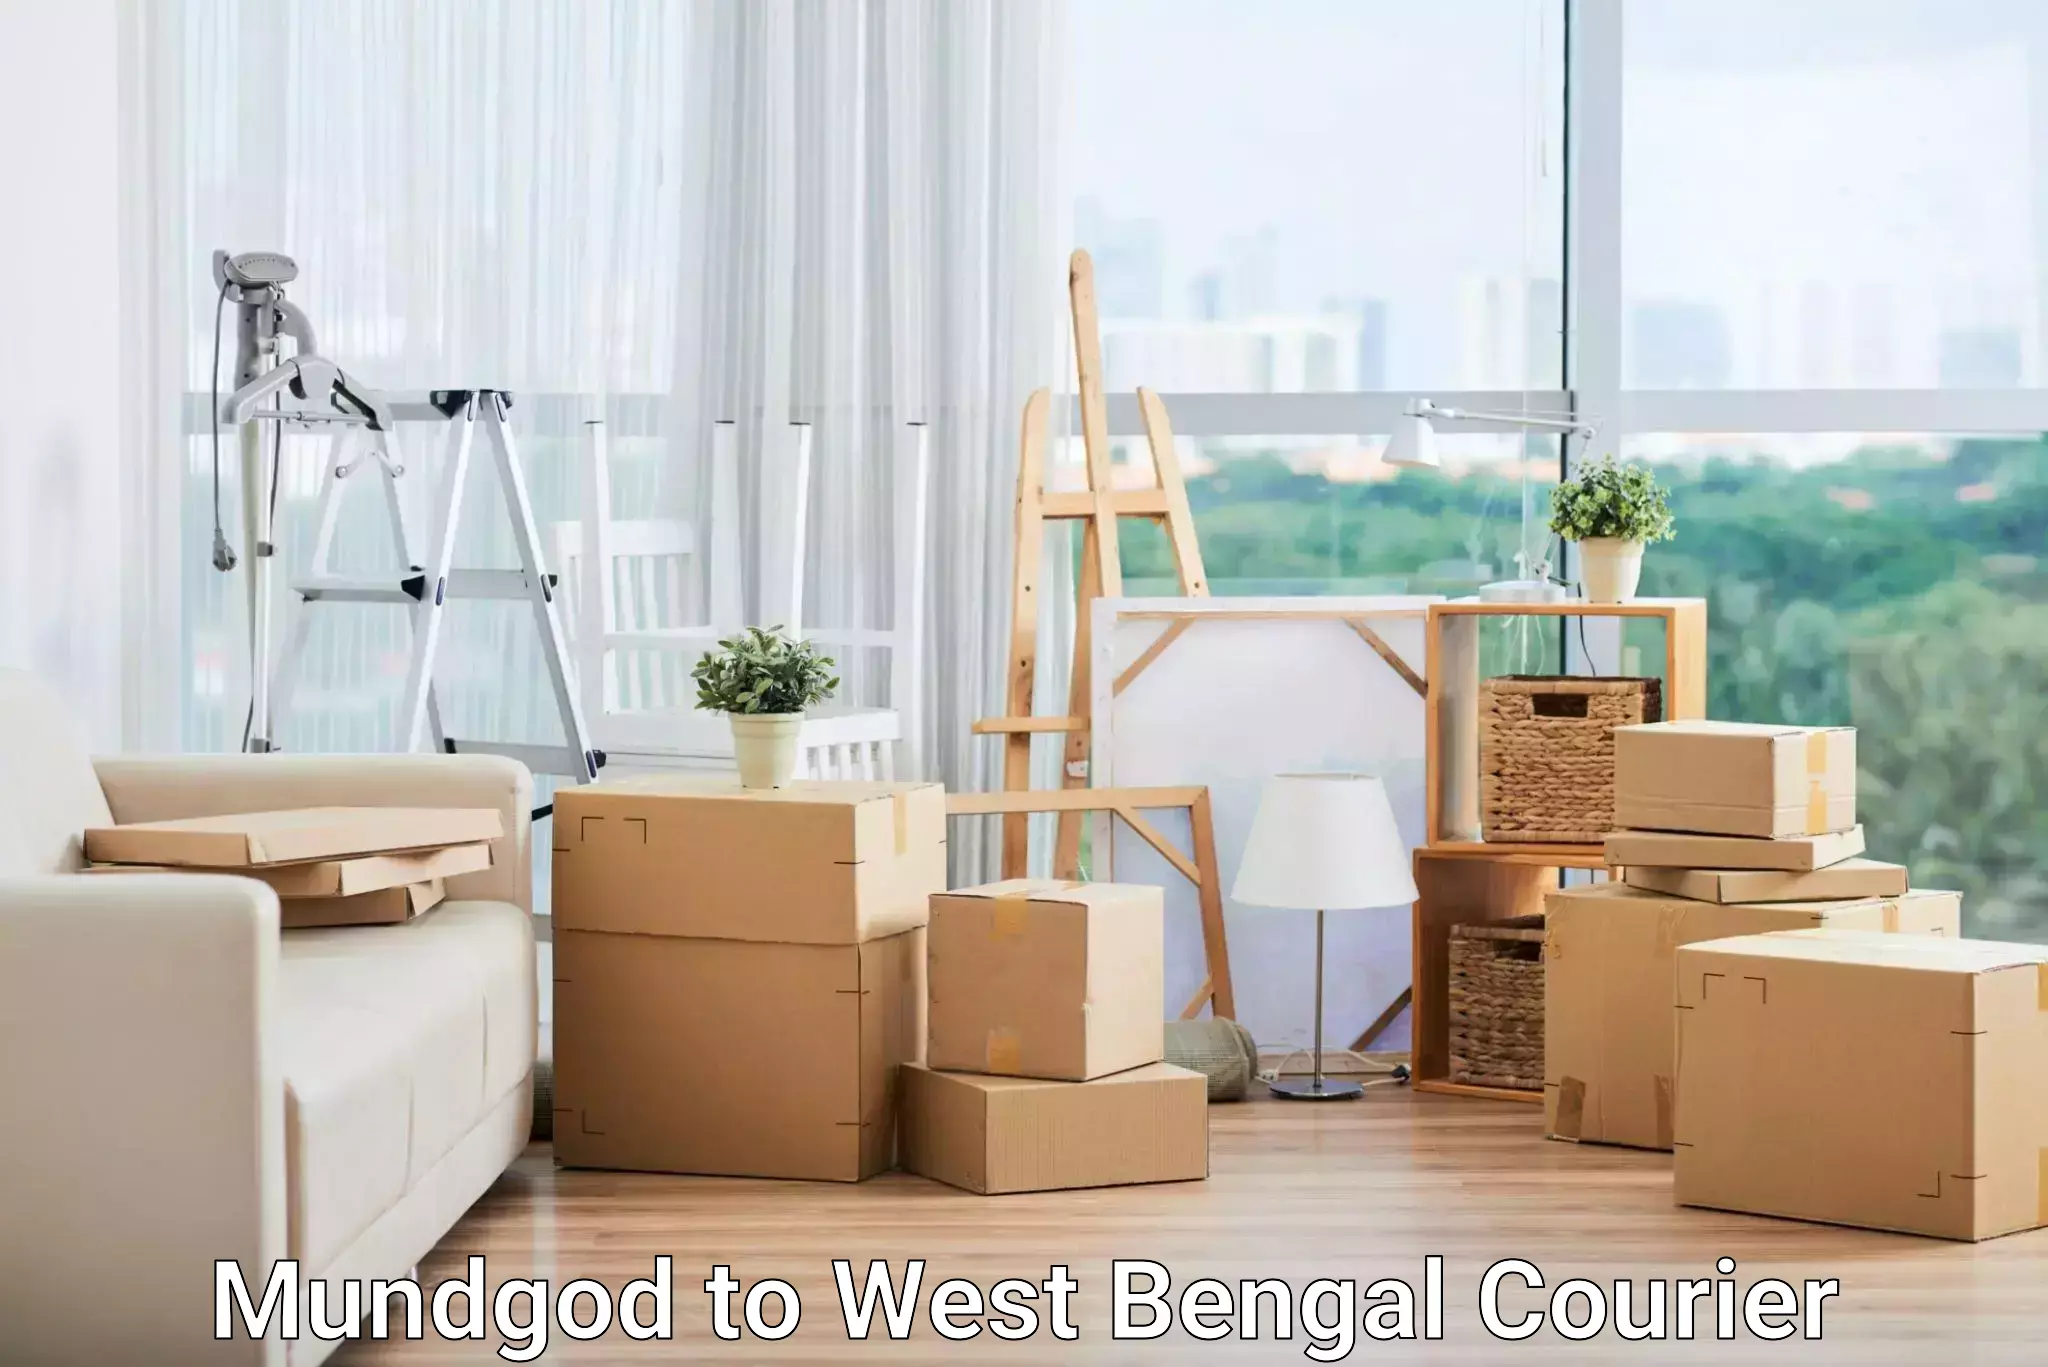 Express mail service in Mundgod to West Bengal